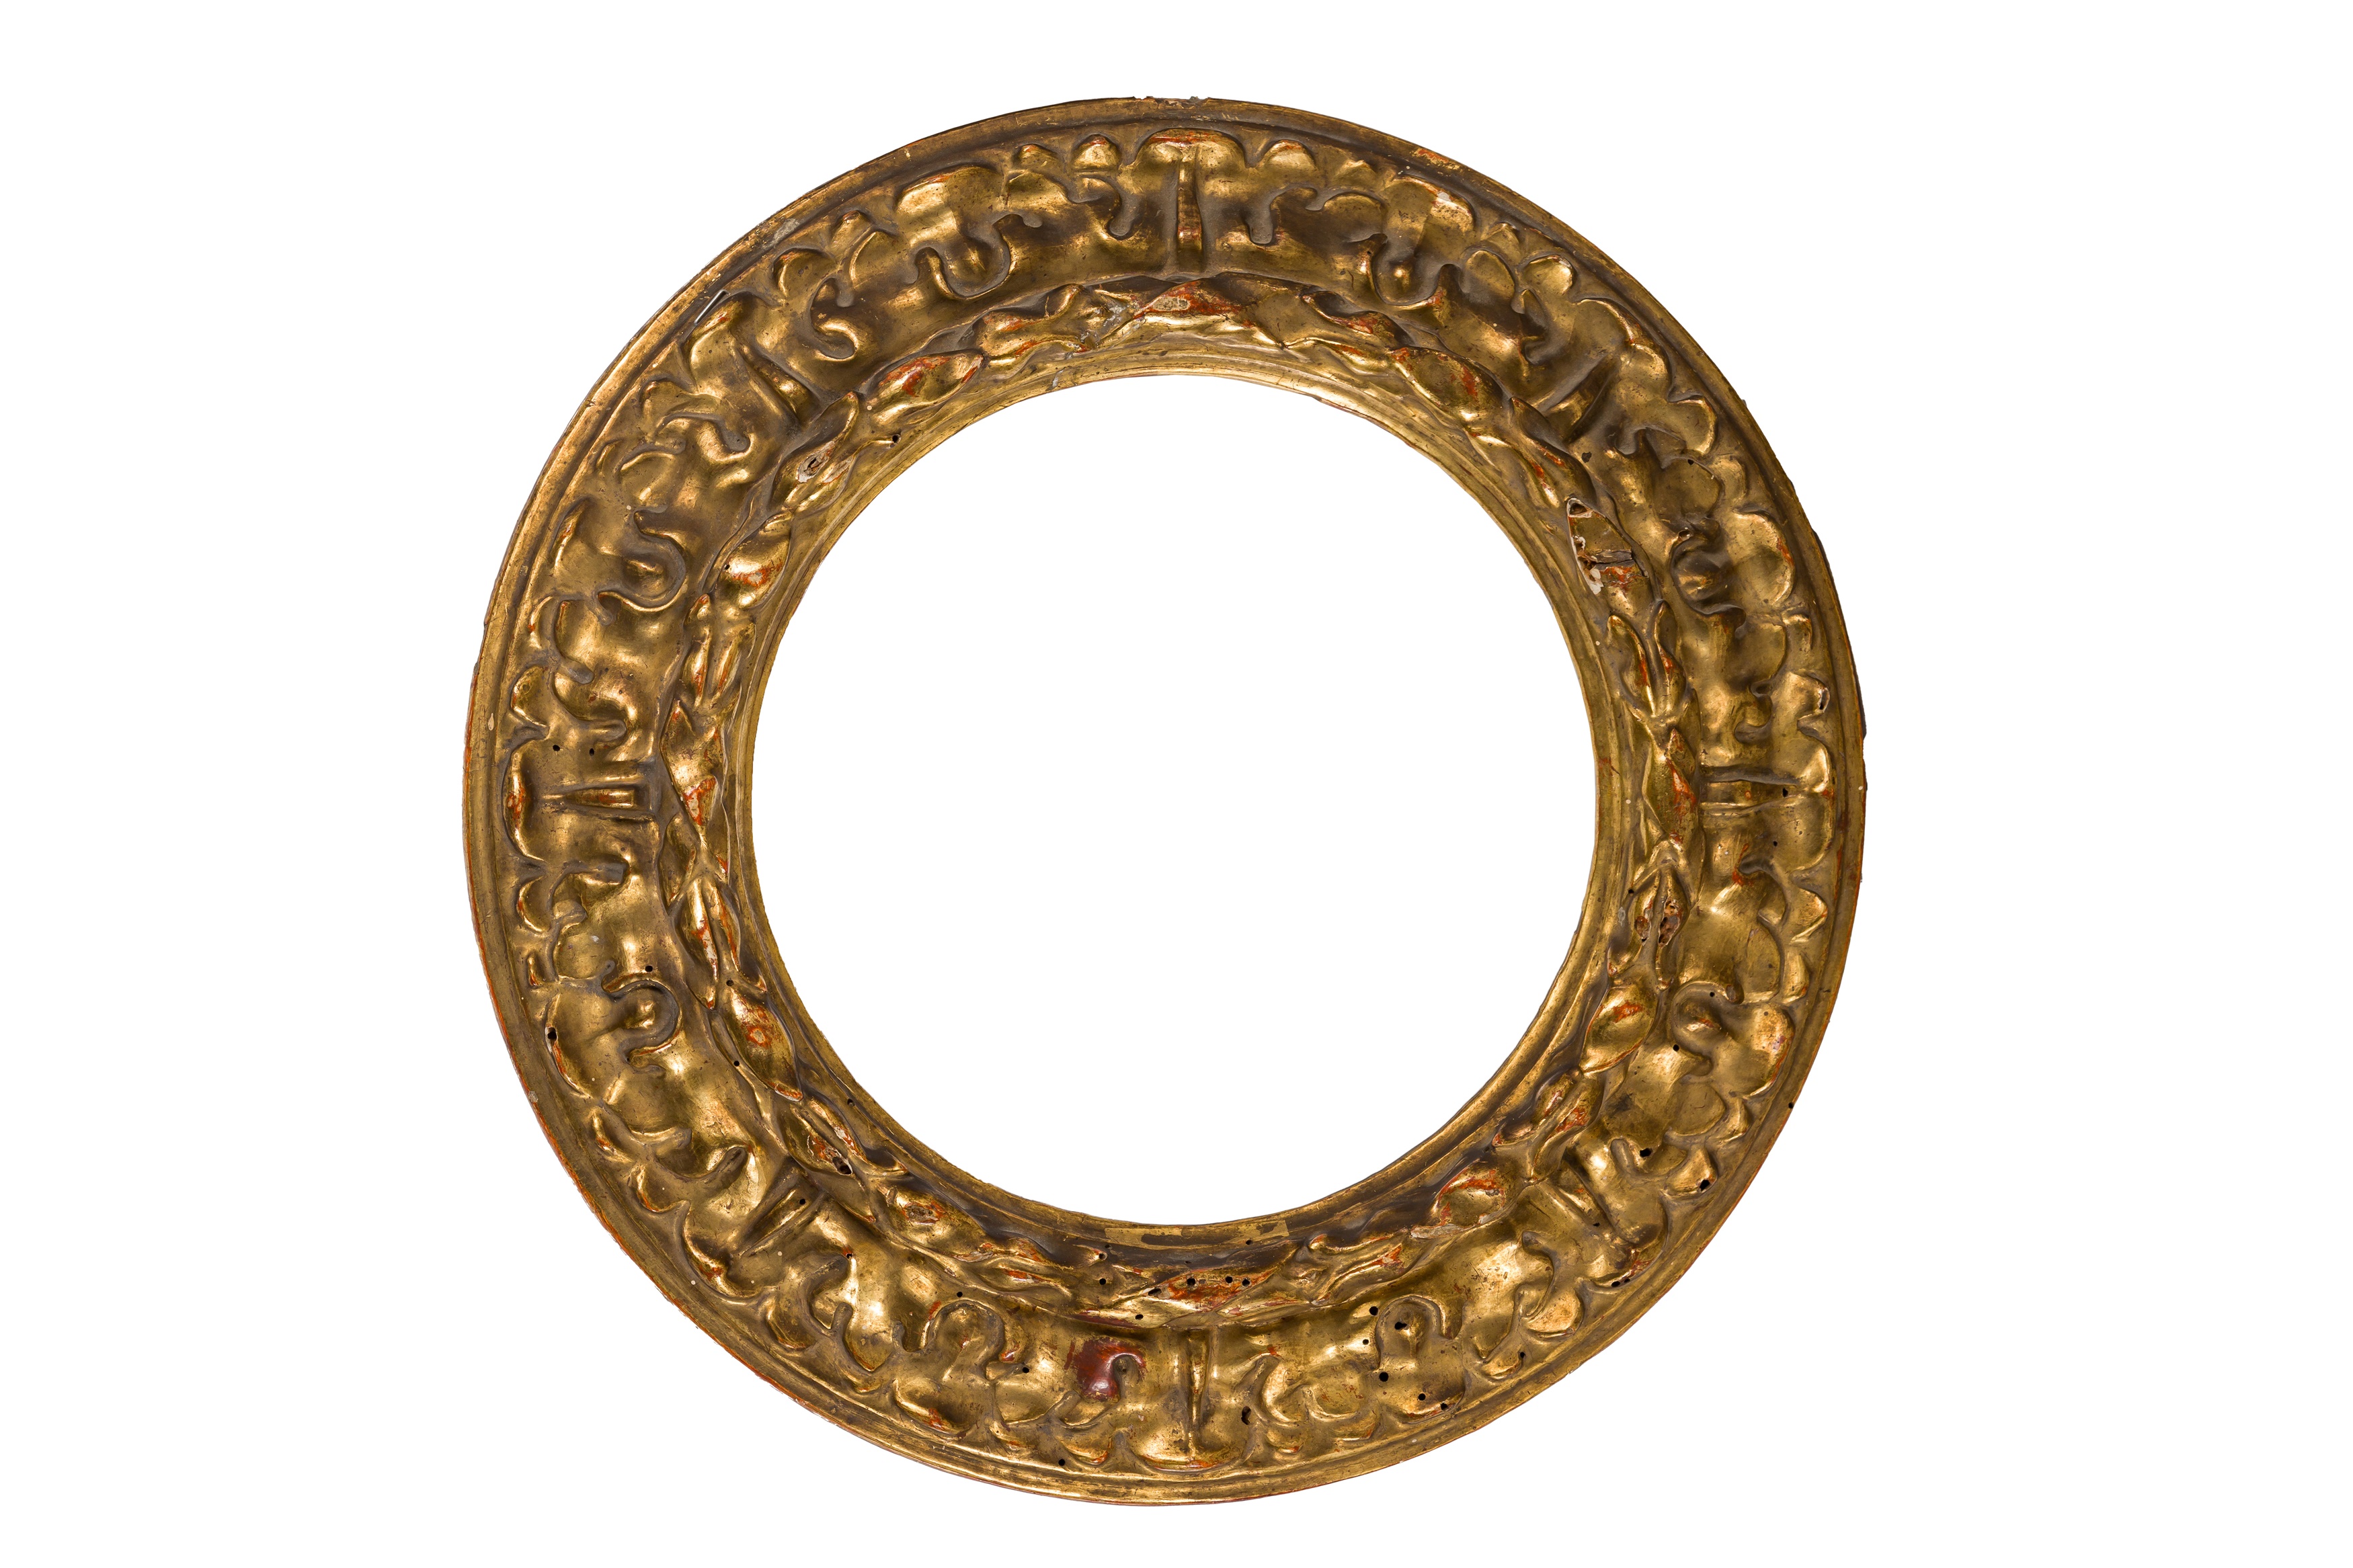 A VENETIAN 18/19TH CENTURY TONDO CARVED AND GILDED RECEDING PROFILE FRAME